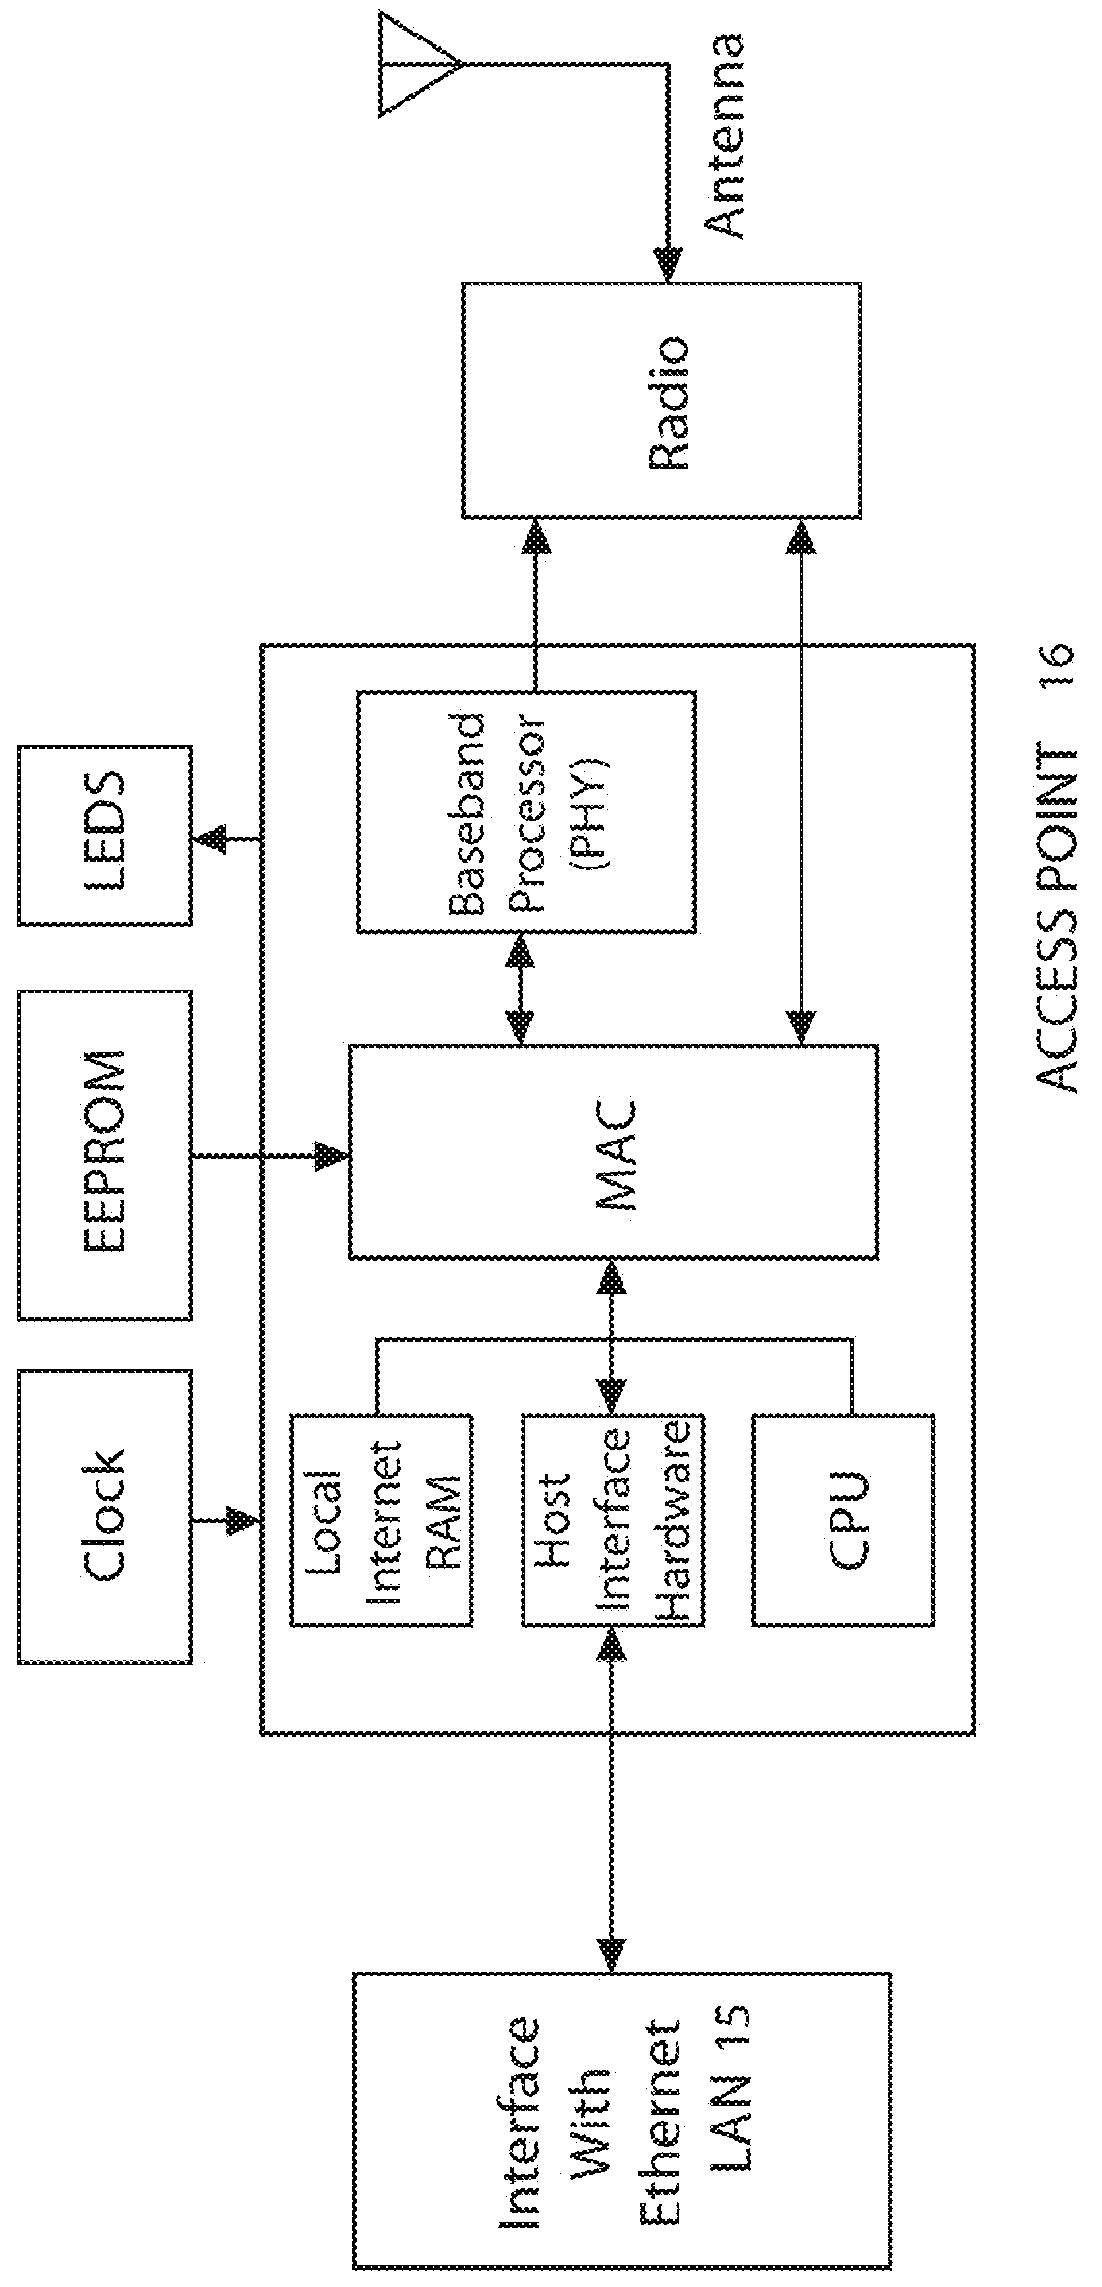 Communication network with secure access for portable users